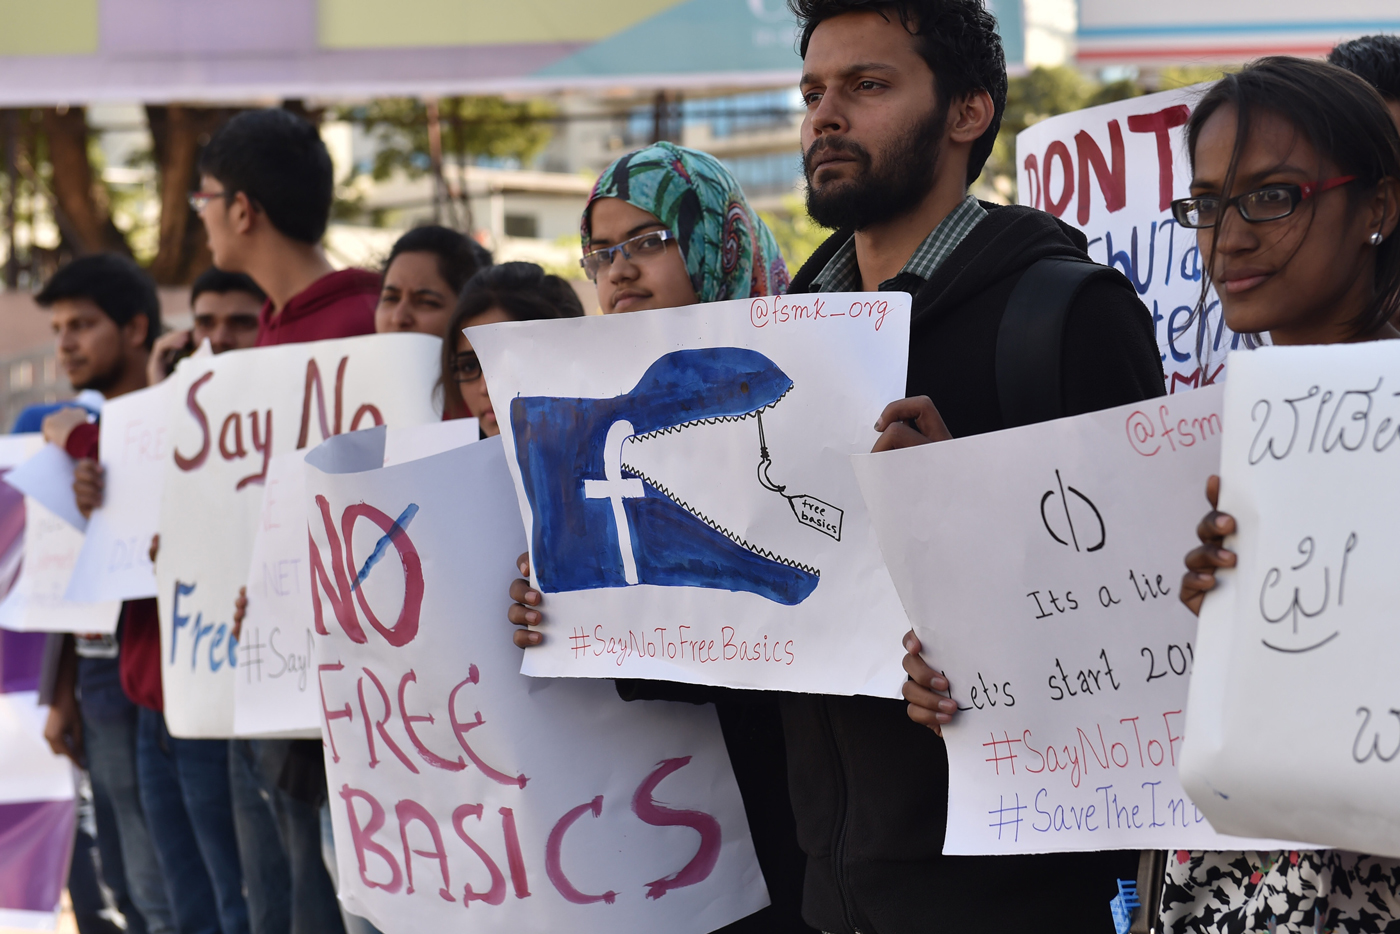 Facebook's Free Basics program did not go over well in India.